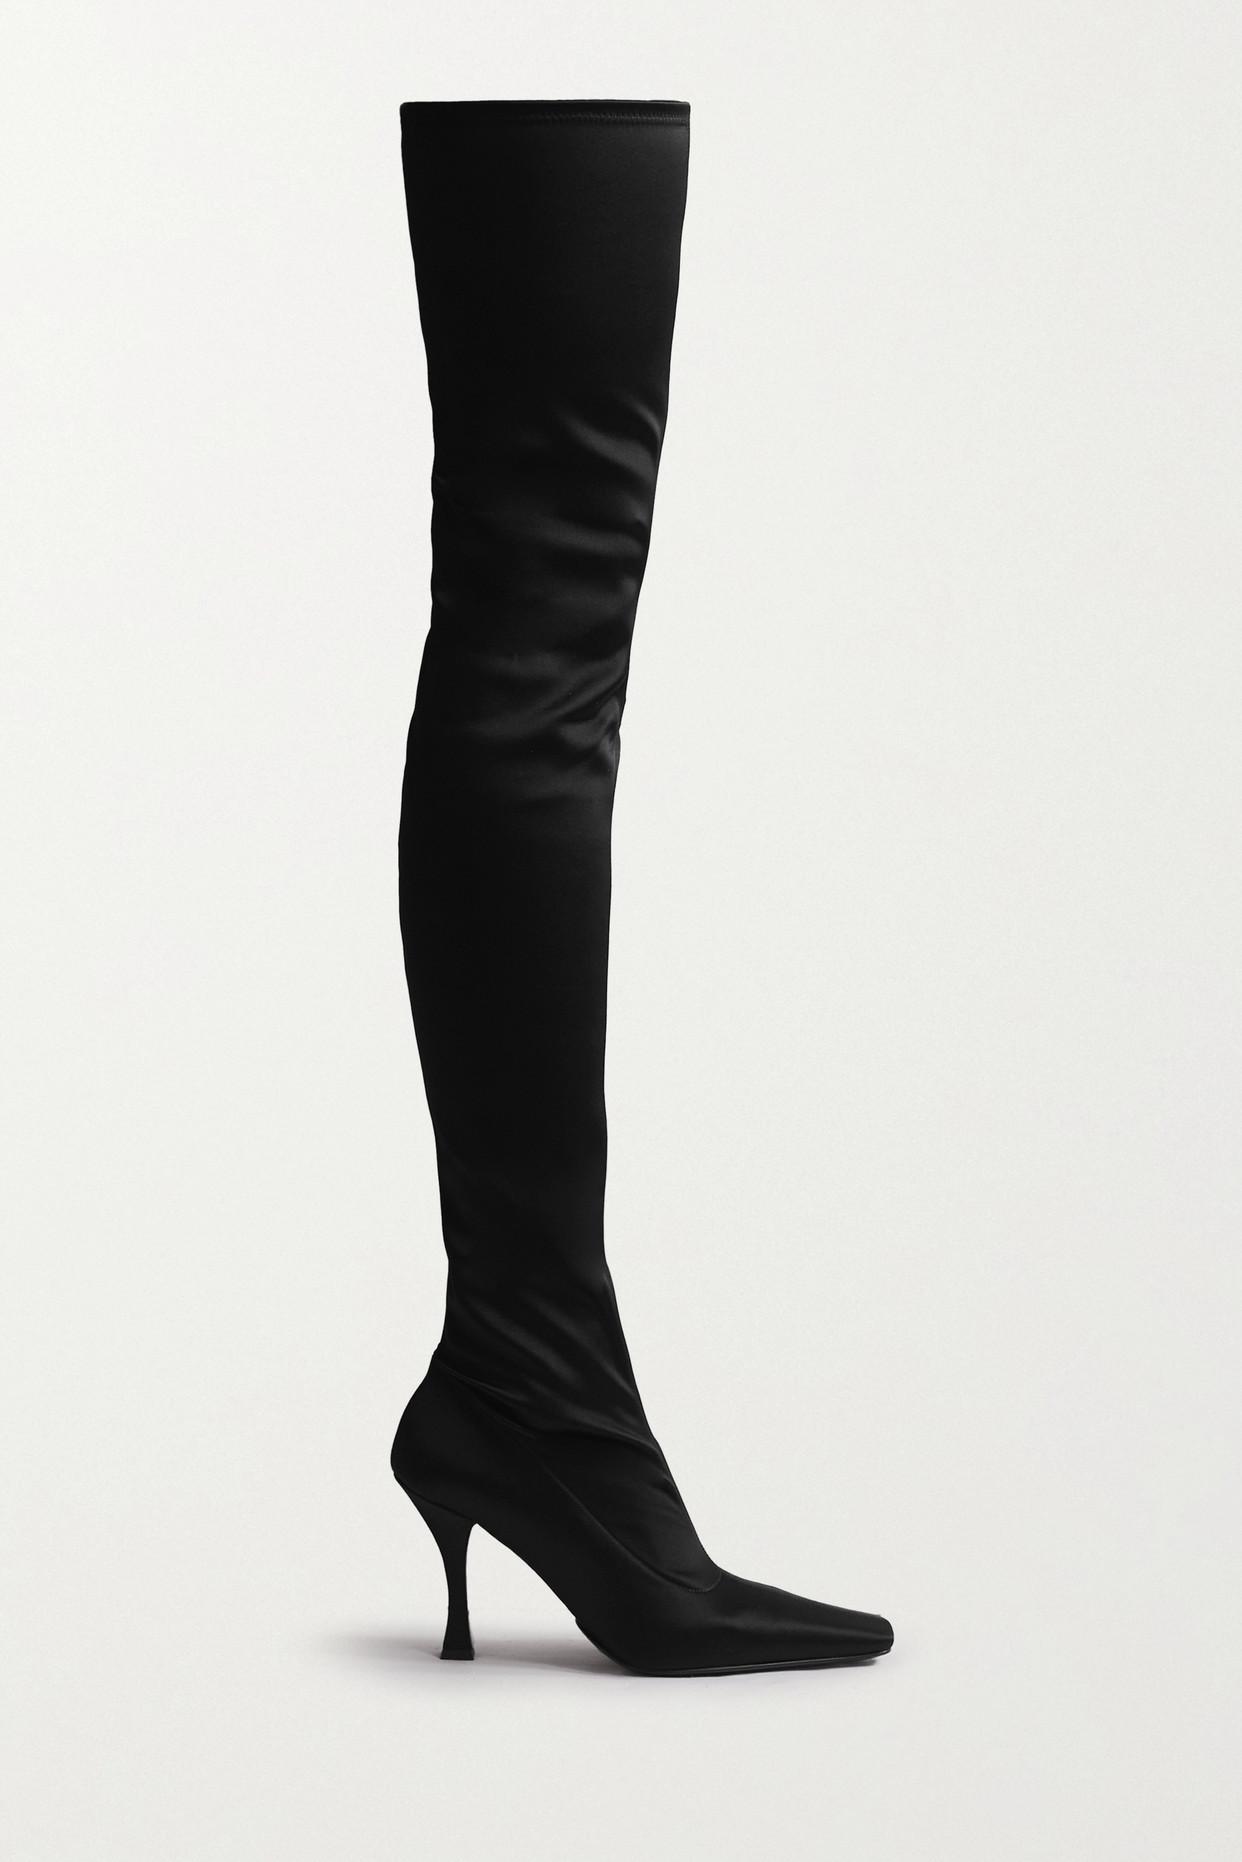 Proenza Schouler Trap Stretch-satin Over-the-knee Boots in Black | Lyst